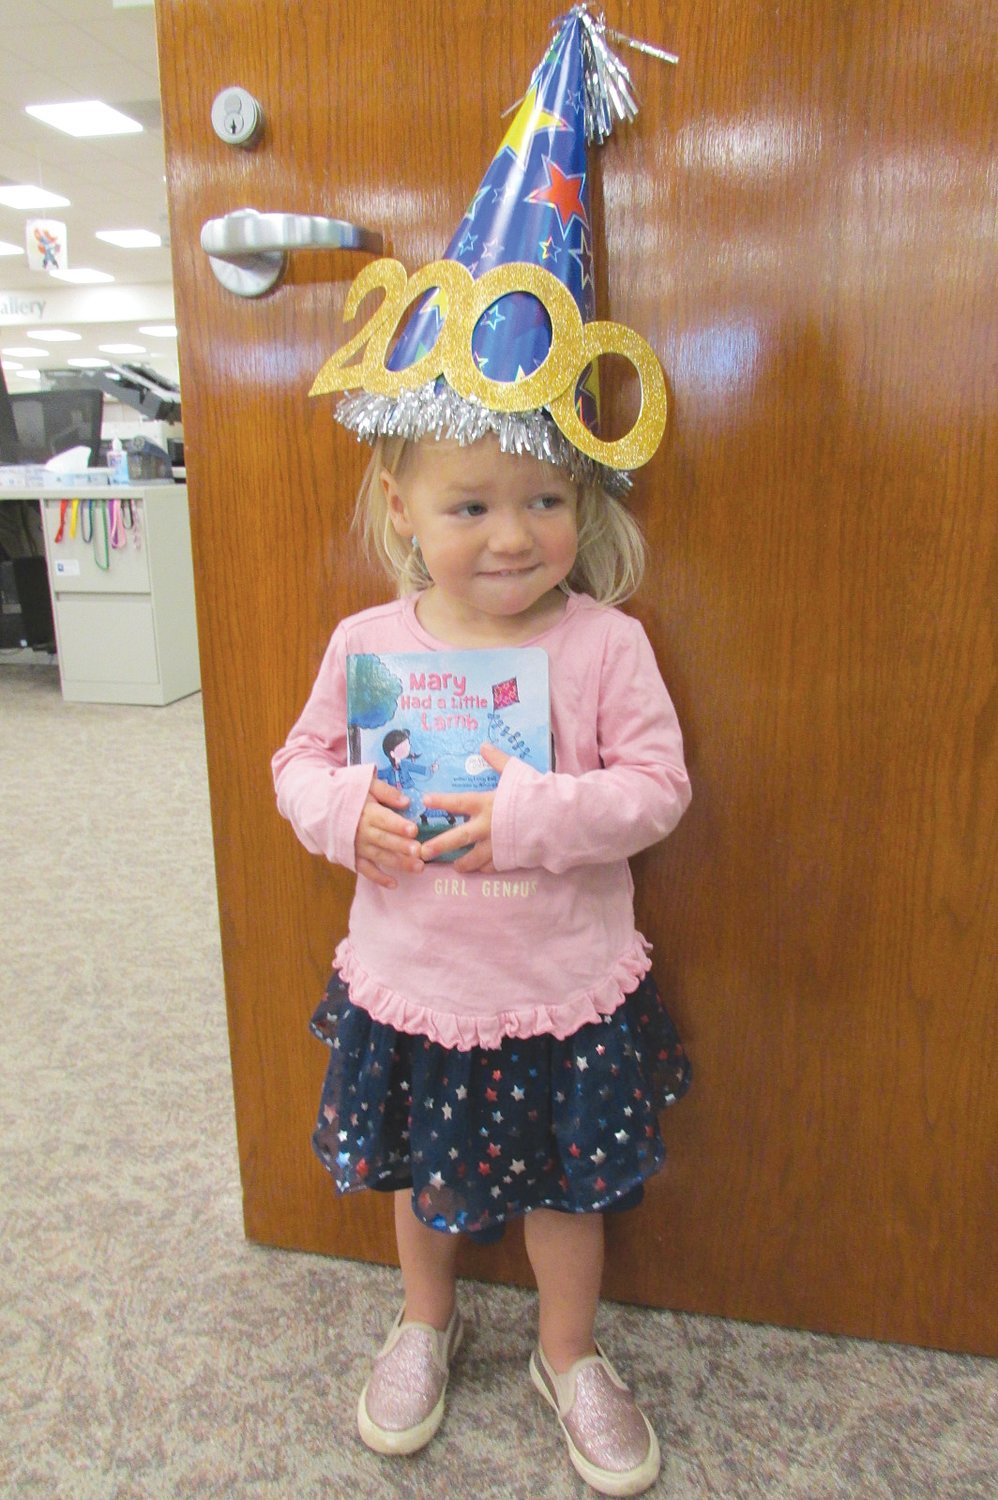 Julia Nichols, 2, has completed the Crawfordsville District Public Library program, 1,000 Books Before Kindergarten, again for the second time. Along, with her parents, Tyler and Mindy Nichols, they have read 2,000 books. Julia's favorite book is "Princess Hyacinth (The Surprising Tale of a Girl Who Floated)" by Florence Heide. Mom said, " Miss Janella and Miss Karen have been so wonderful in their modifications to the reading programs. We look forward to our weekly stories, activities and crafts to stay involved with our library friends."